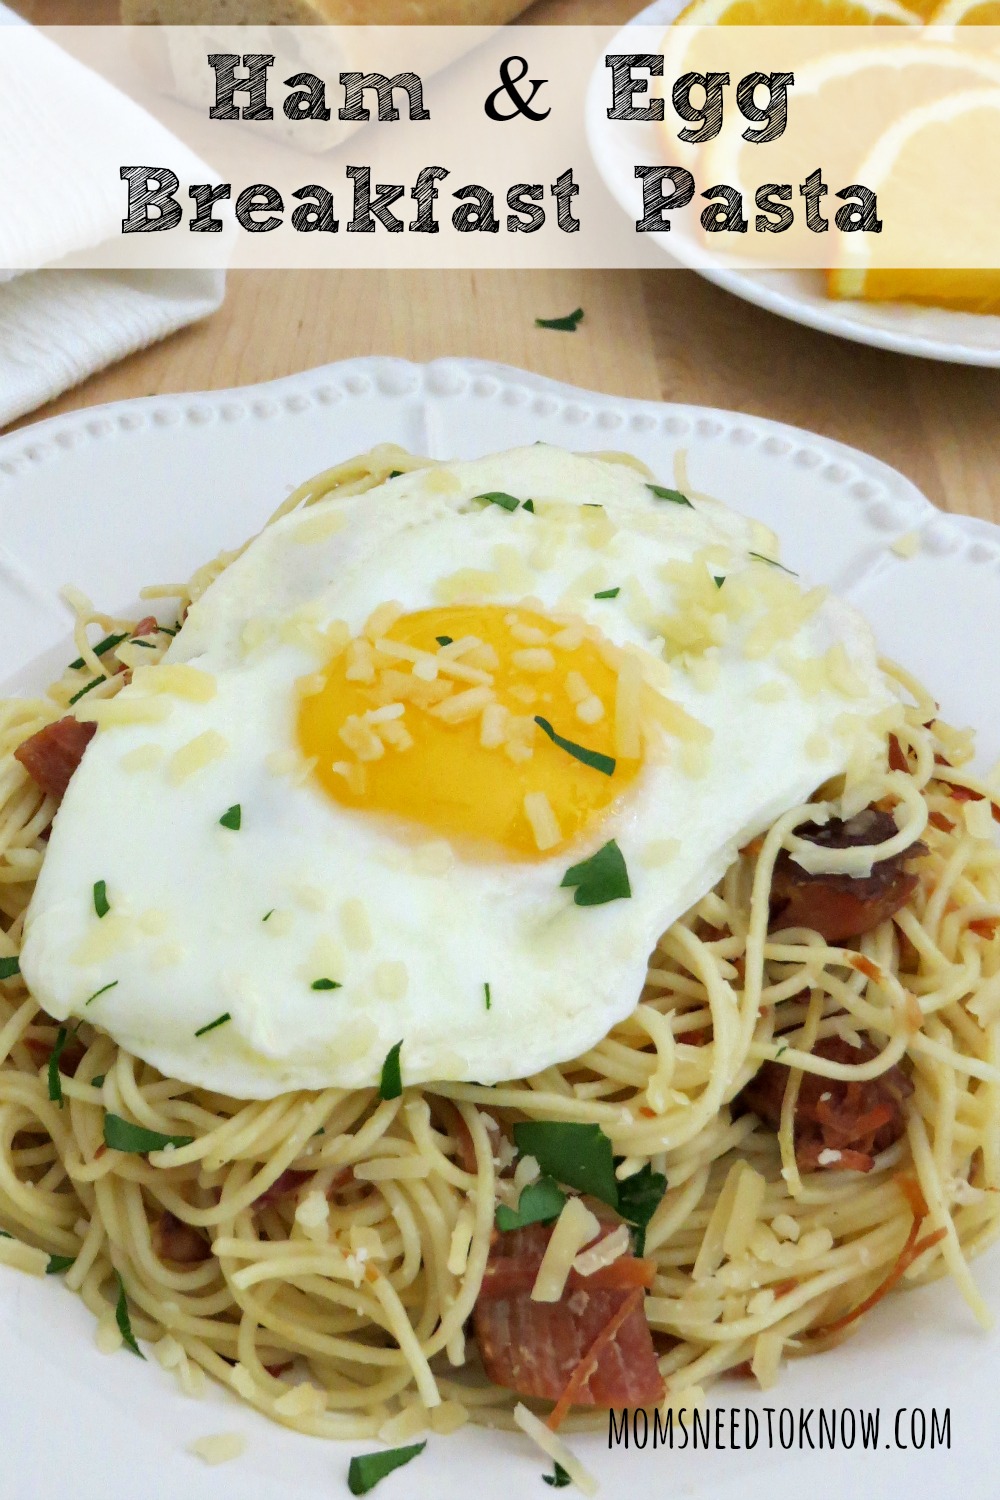 Breakfast pasta is becoming more popular and this recipe can be made with ham or bacon. The runny yolk acts as a sauce for the pasta and is so yummy!